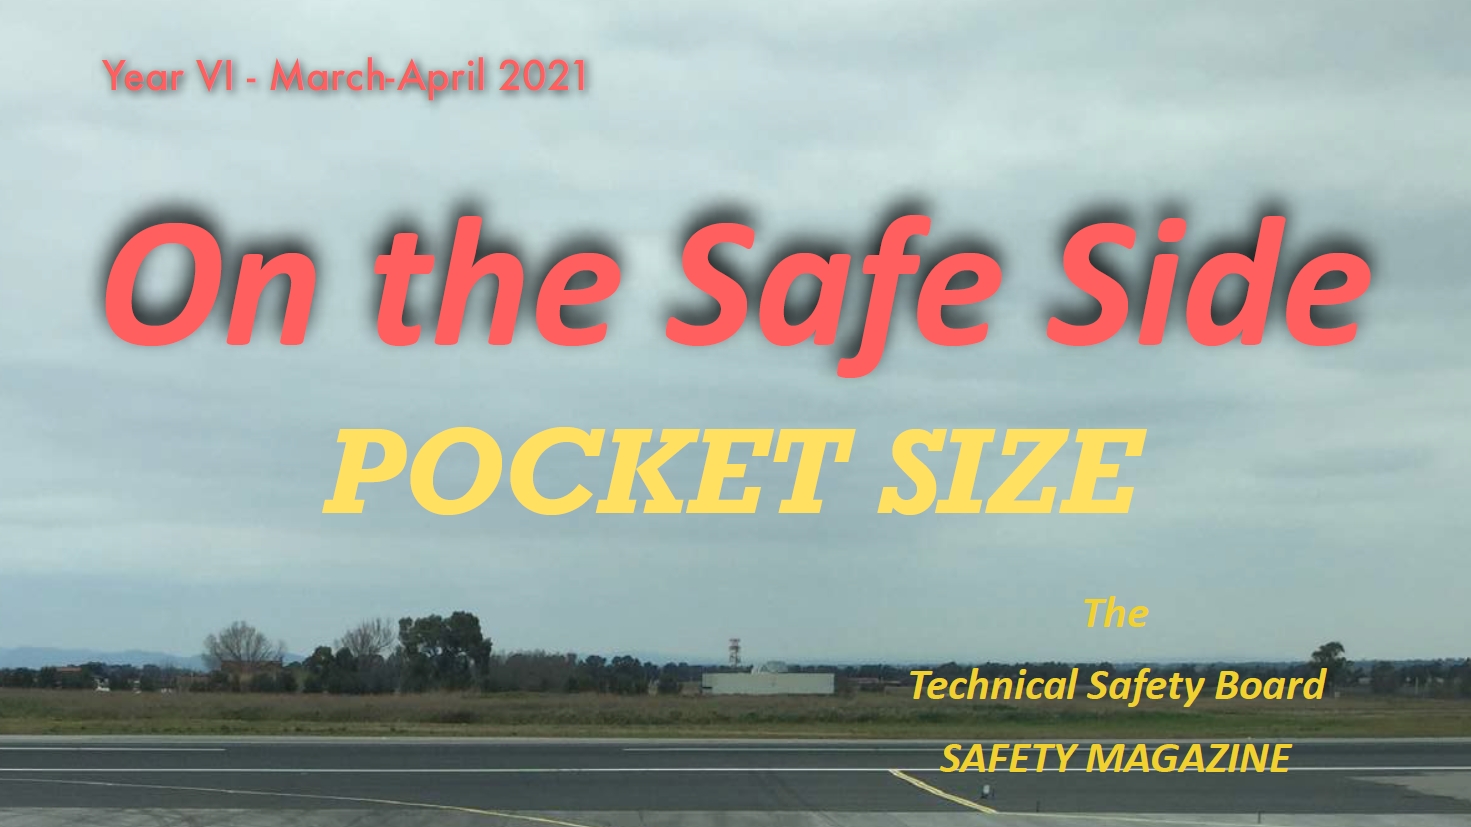 ON THE SAFE SIDE: Year VI – March-April 2021